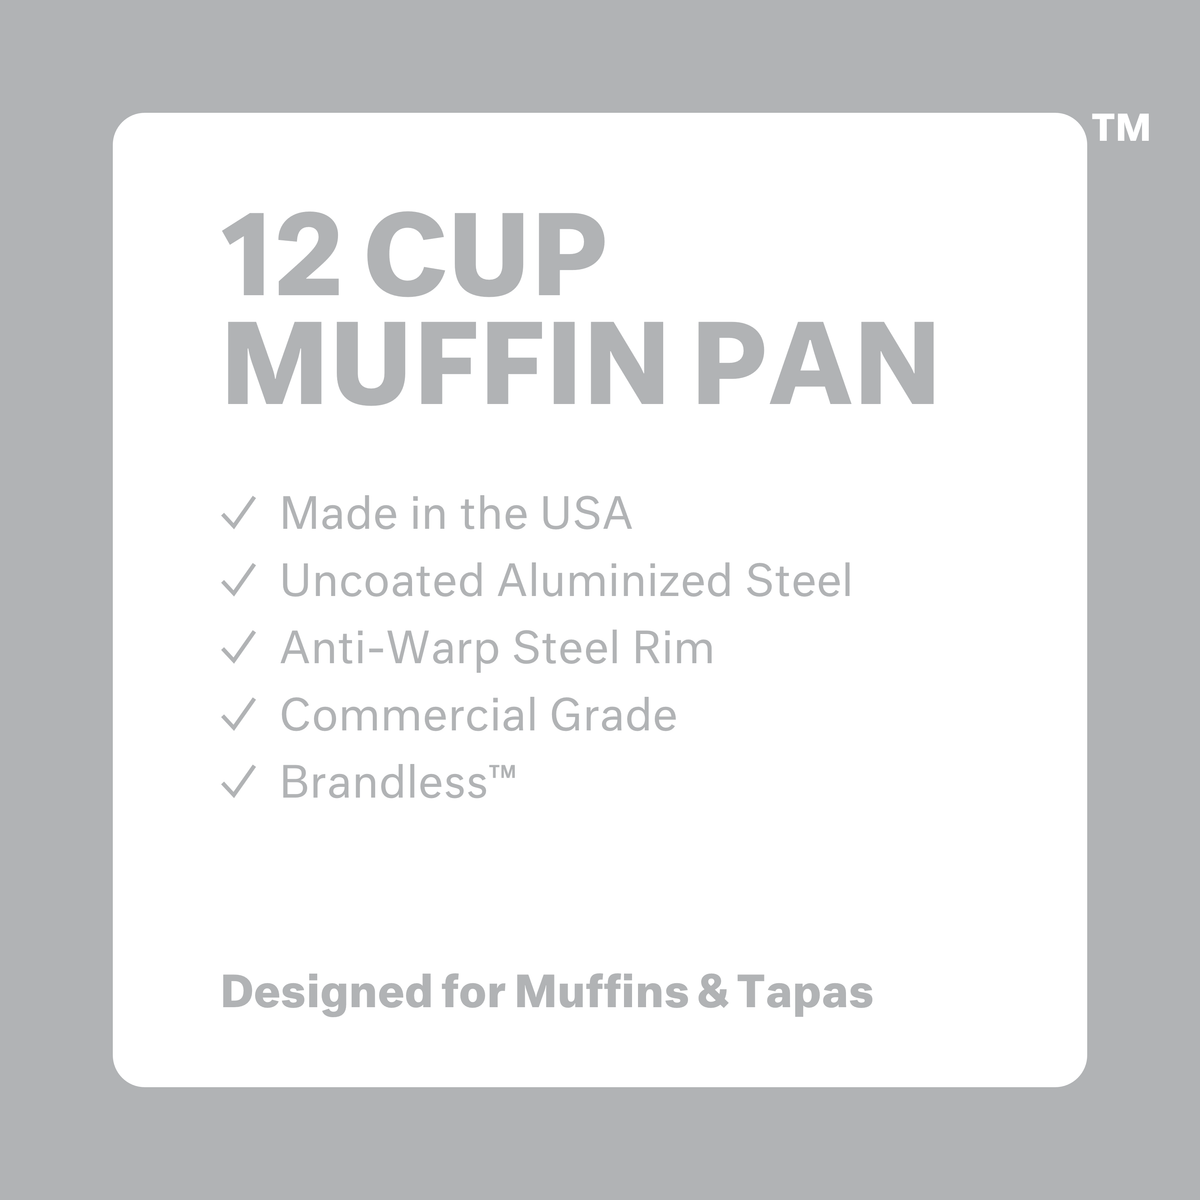 12 cup miffin pan.  Made in the USA.  Uncoated aluminized steel.  Anti-warp steel rim.  Commercial grade.  Brandless.  Designed for muffins &amp; tapas.